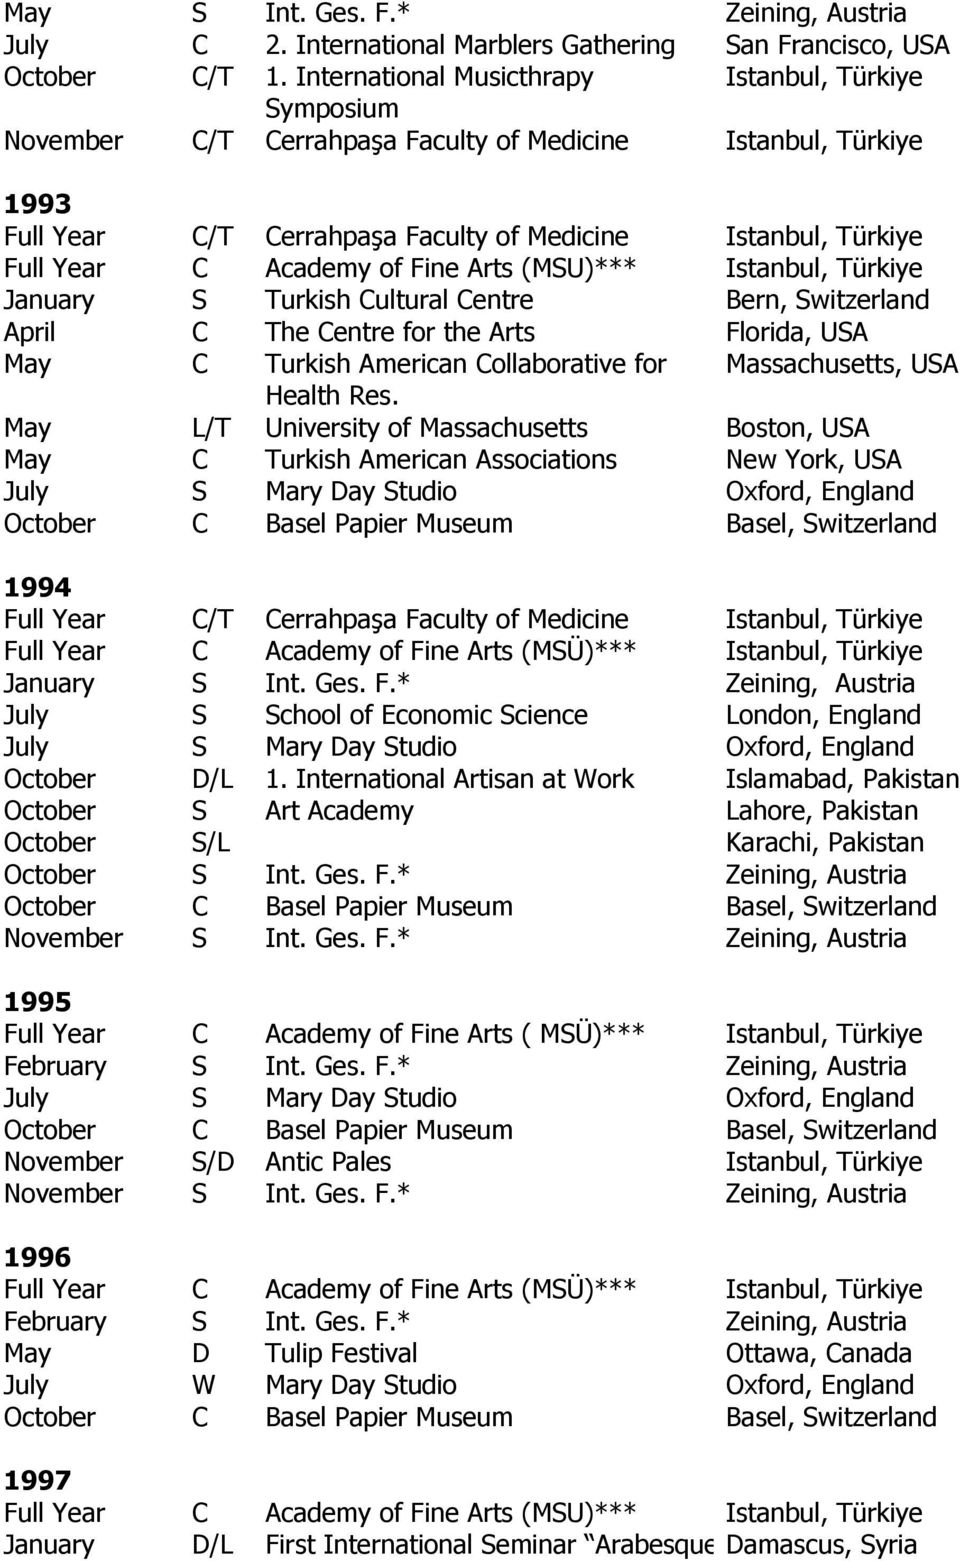 Academy of Fine Arts (MSU)*** Istanbul, Türkiye January S Turkish Cultural Centre Bern, Switzerland April C The Centre for the Arts Florida, USA May C Turkish American Collaborative for